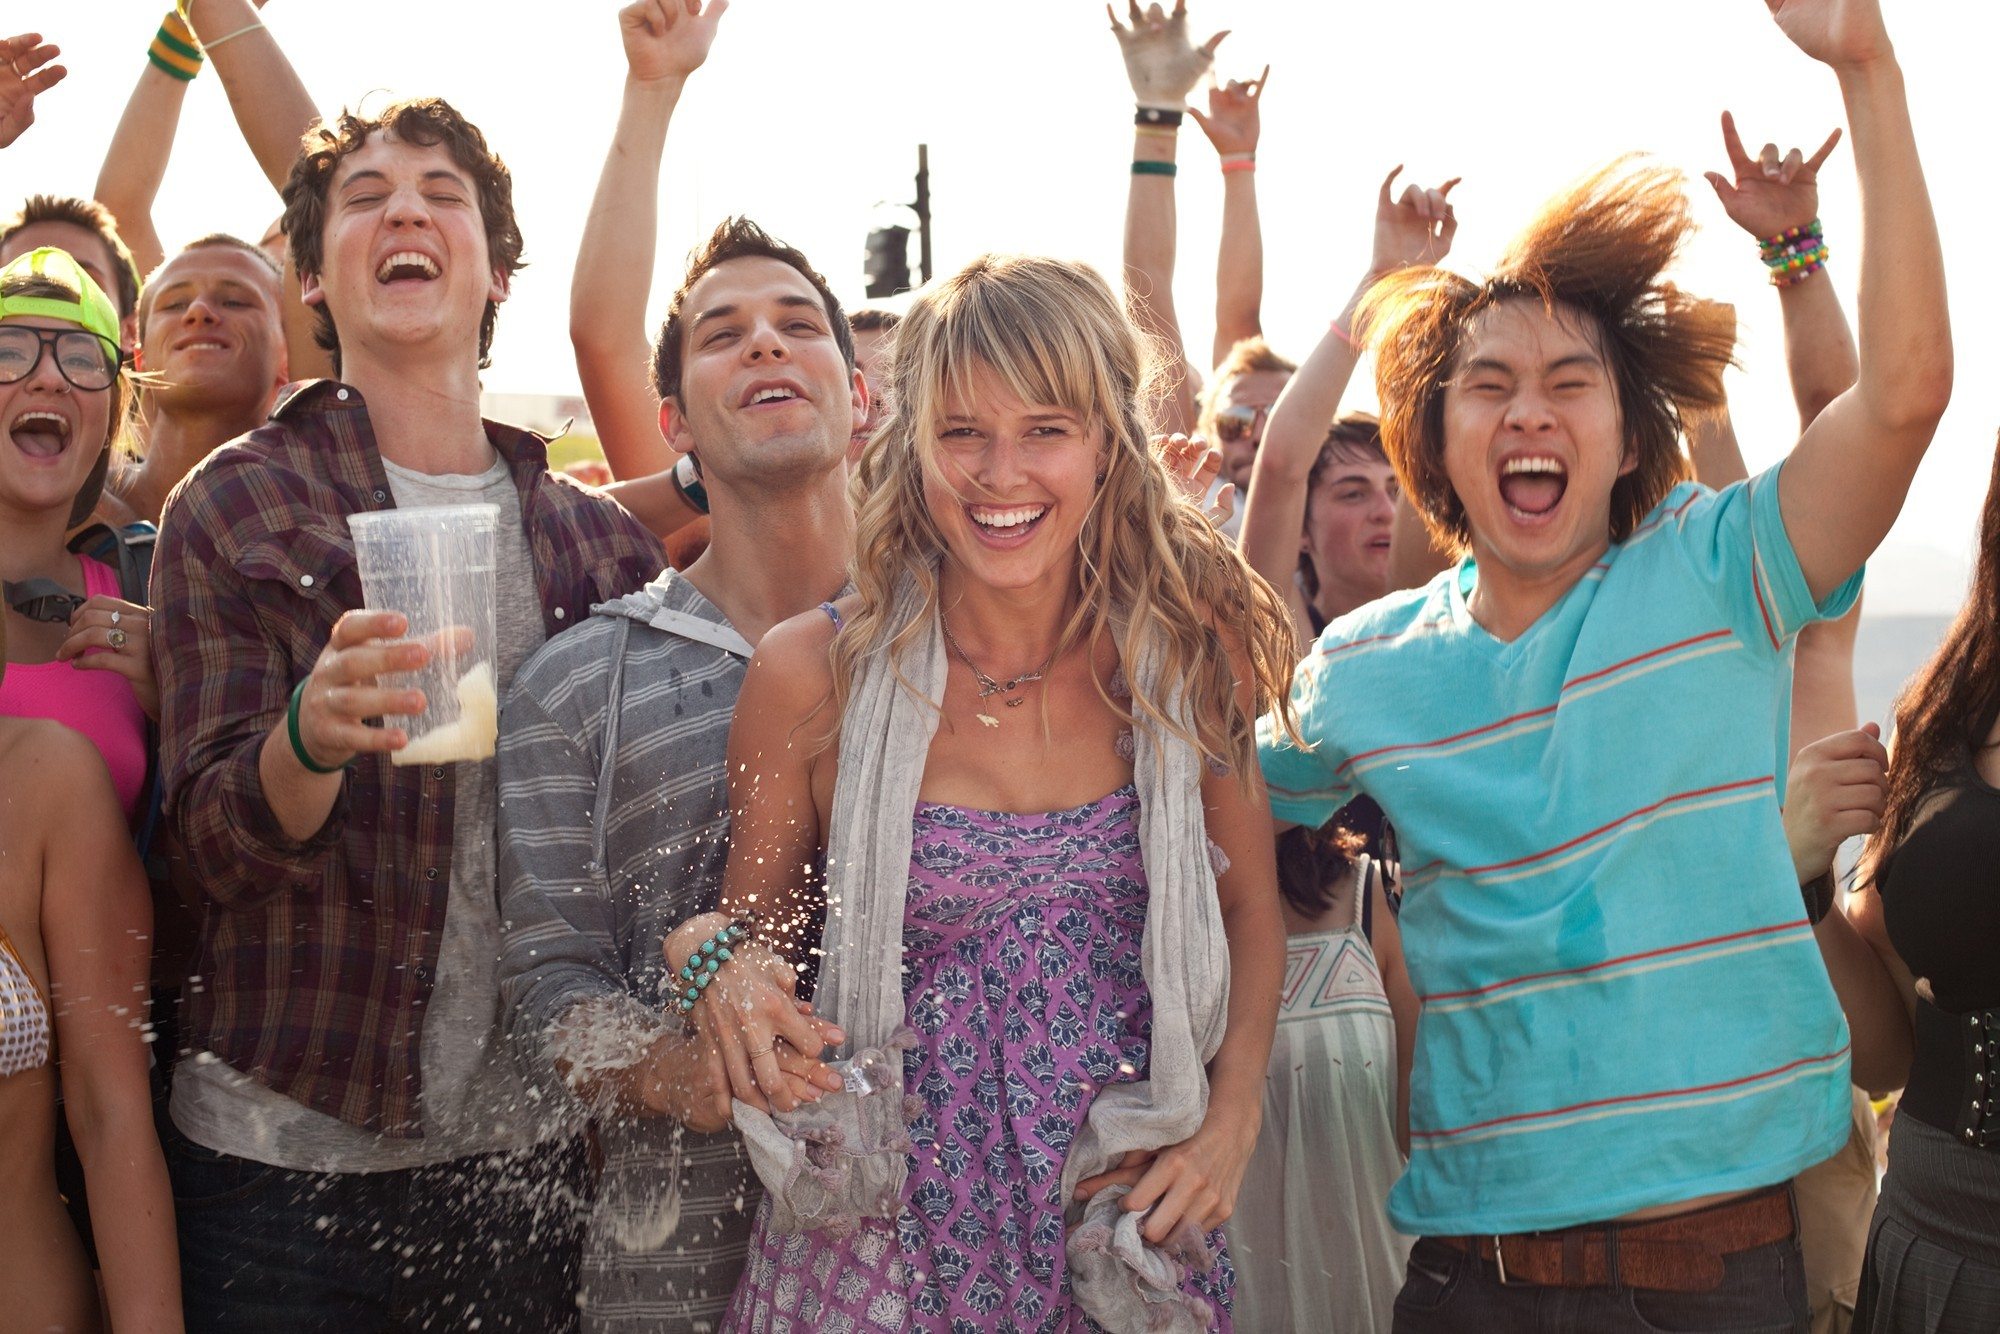 Miles Teller, Skylar Astin, Sarah Wright and Justin Chon in Relativity Media's 21 and Over (2013)